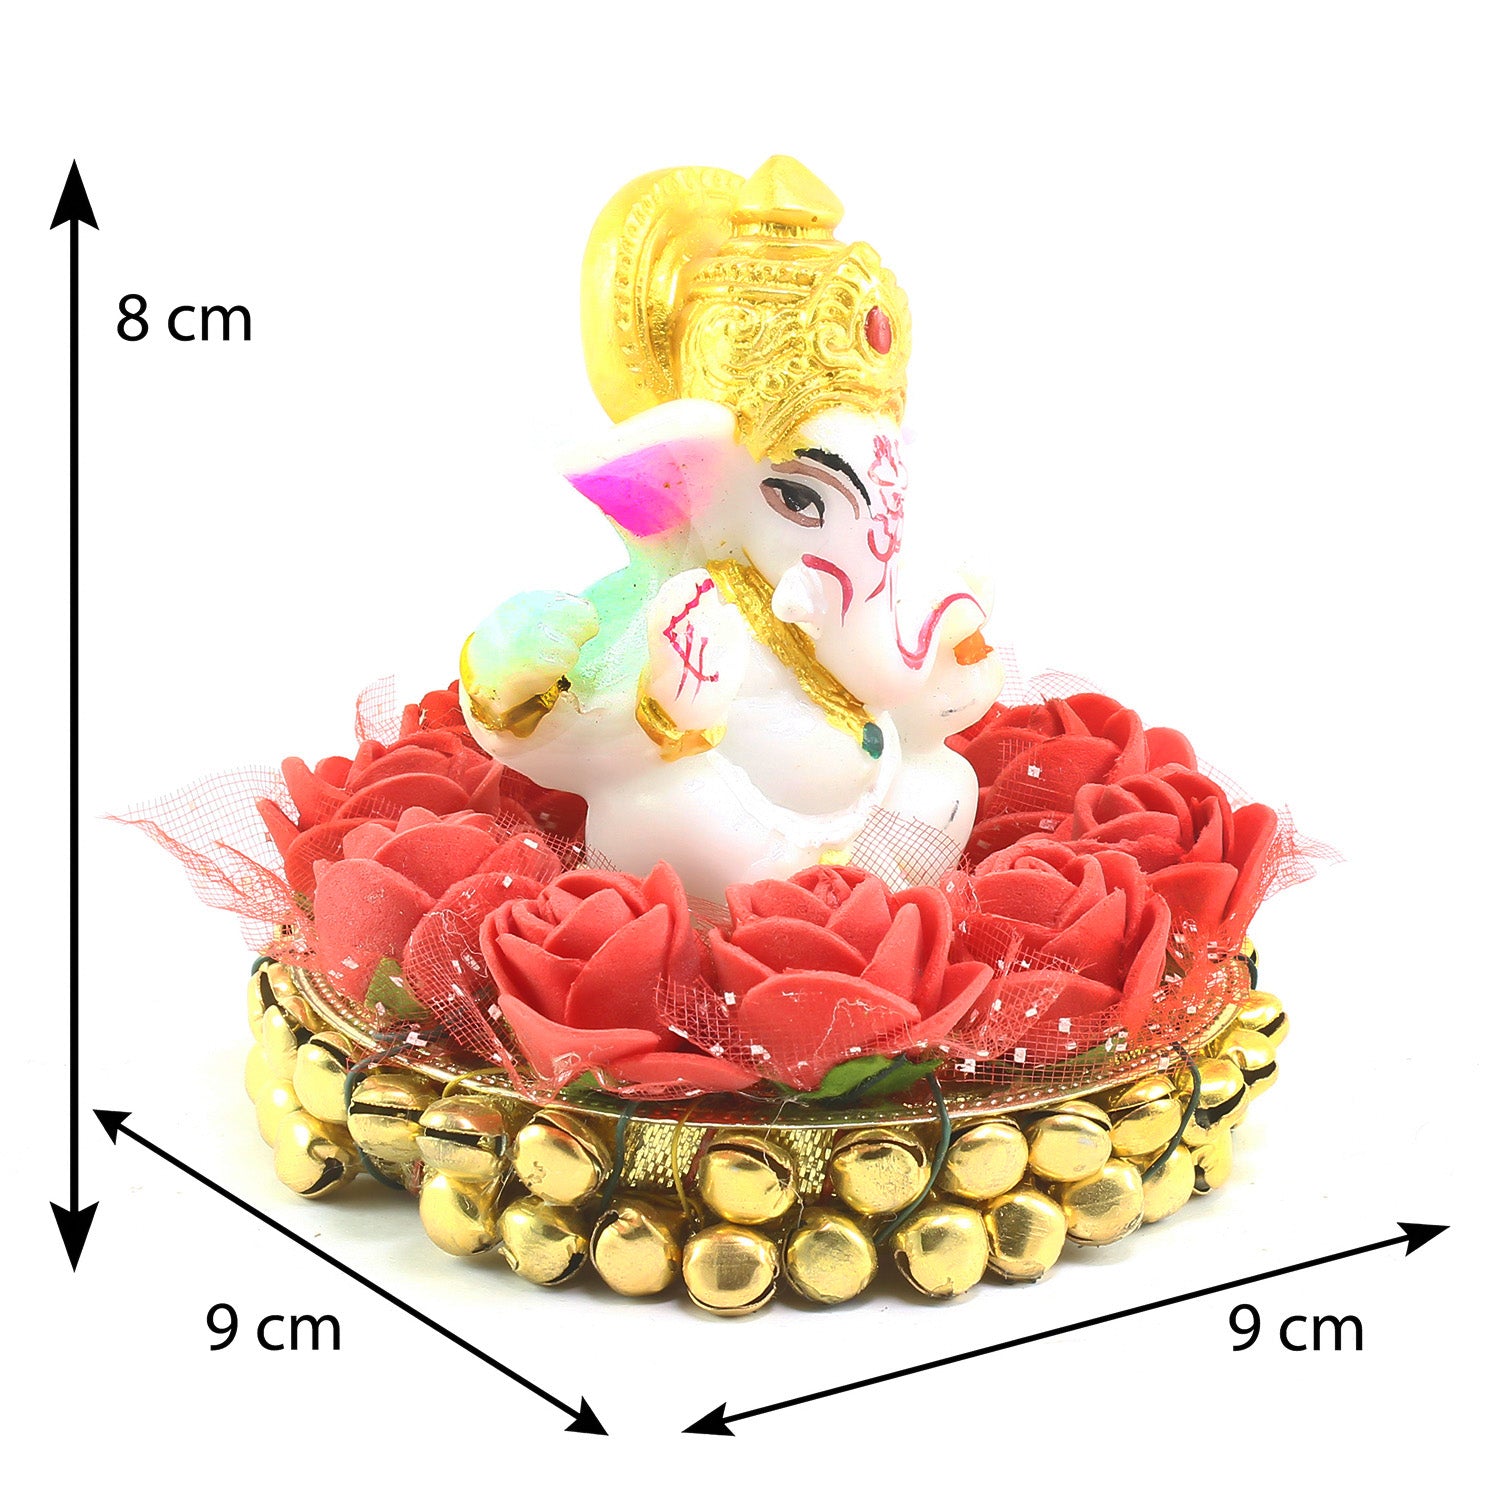 Polyresin Lord Ganesha Idol on Decorative Plate for Car Dashboard and Home 2